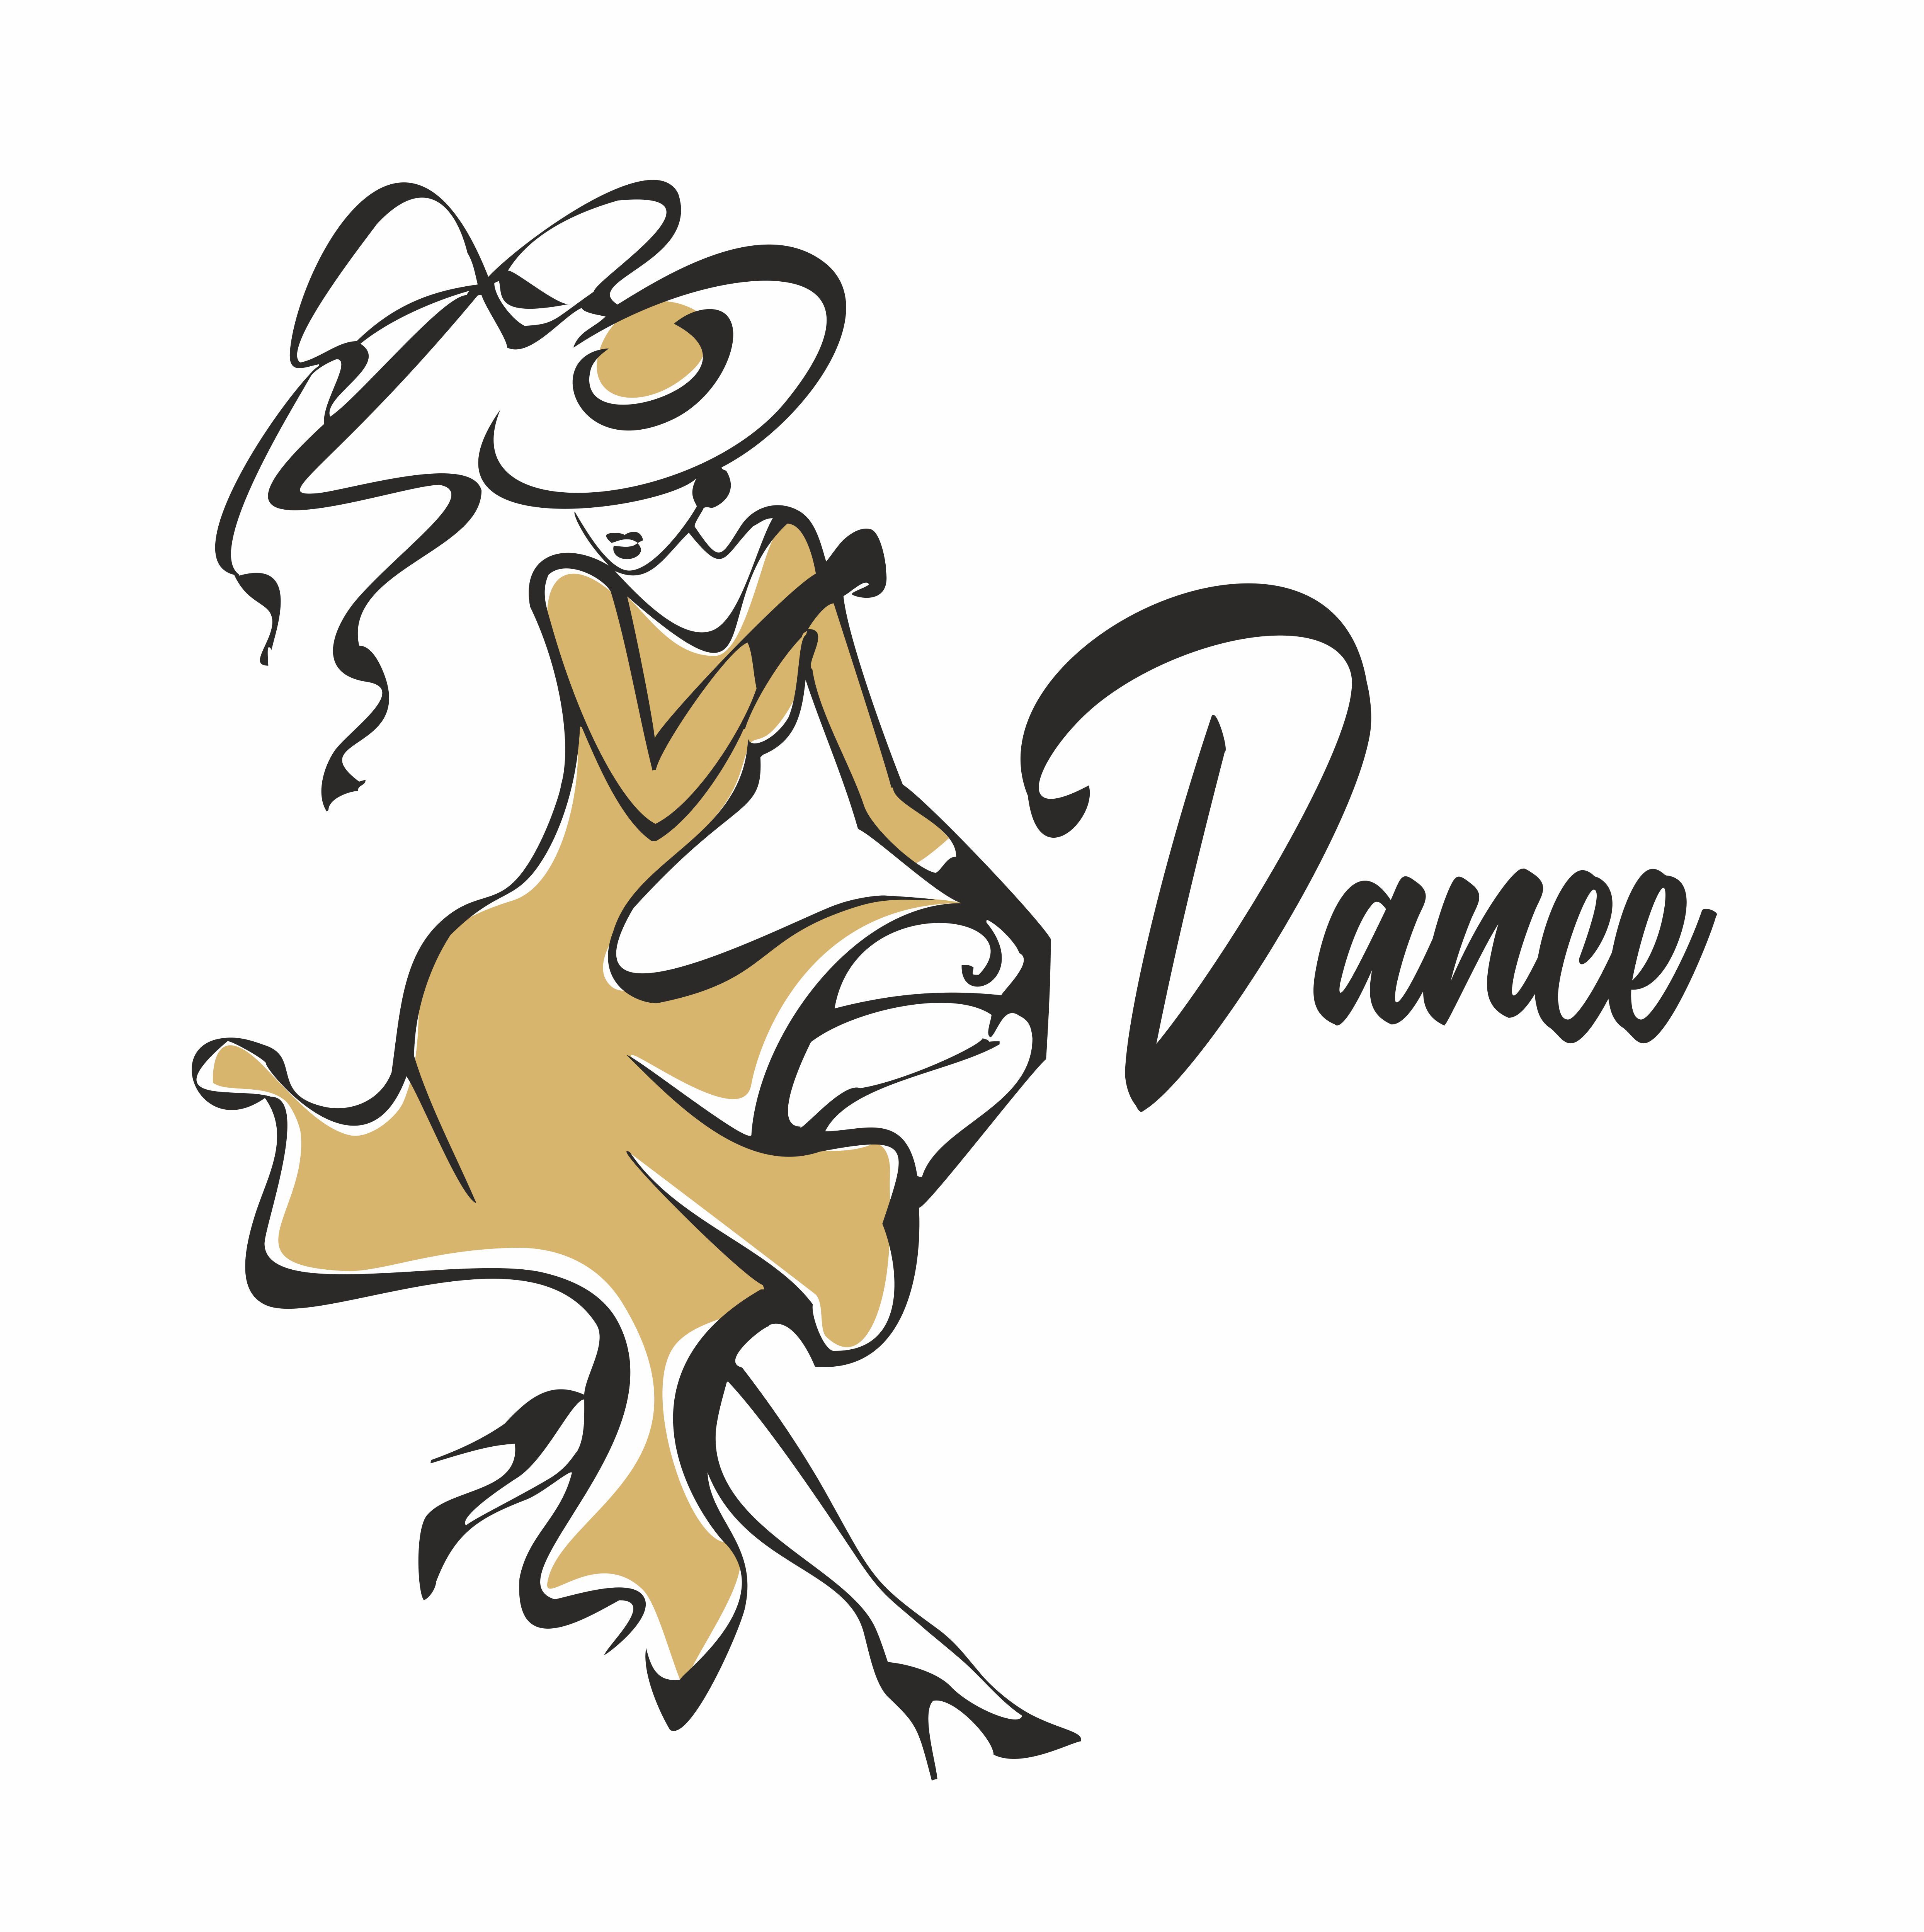 Dancer. The logo for the dance industry. Girl in a gold dress and a hat ...